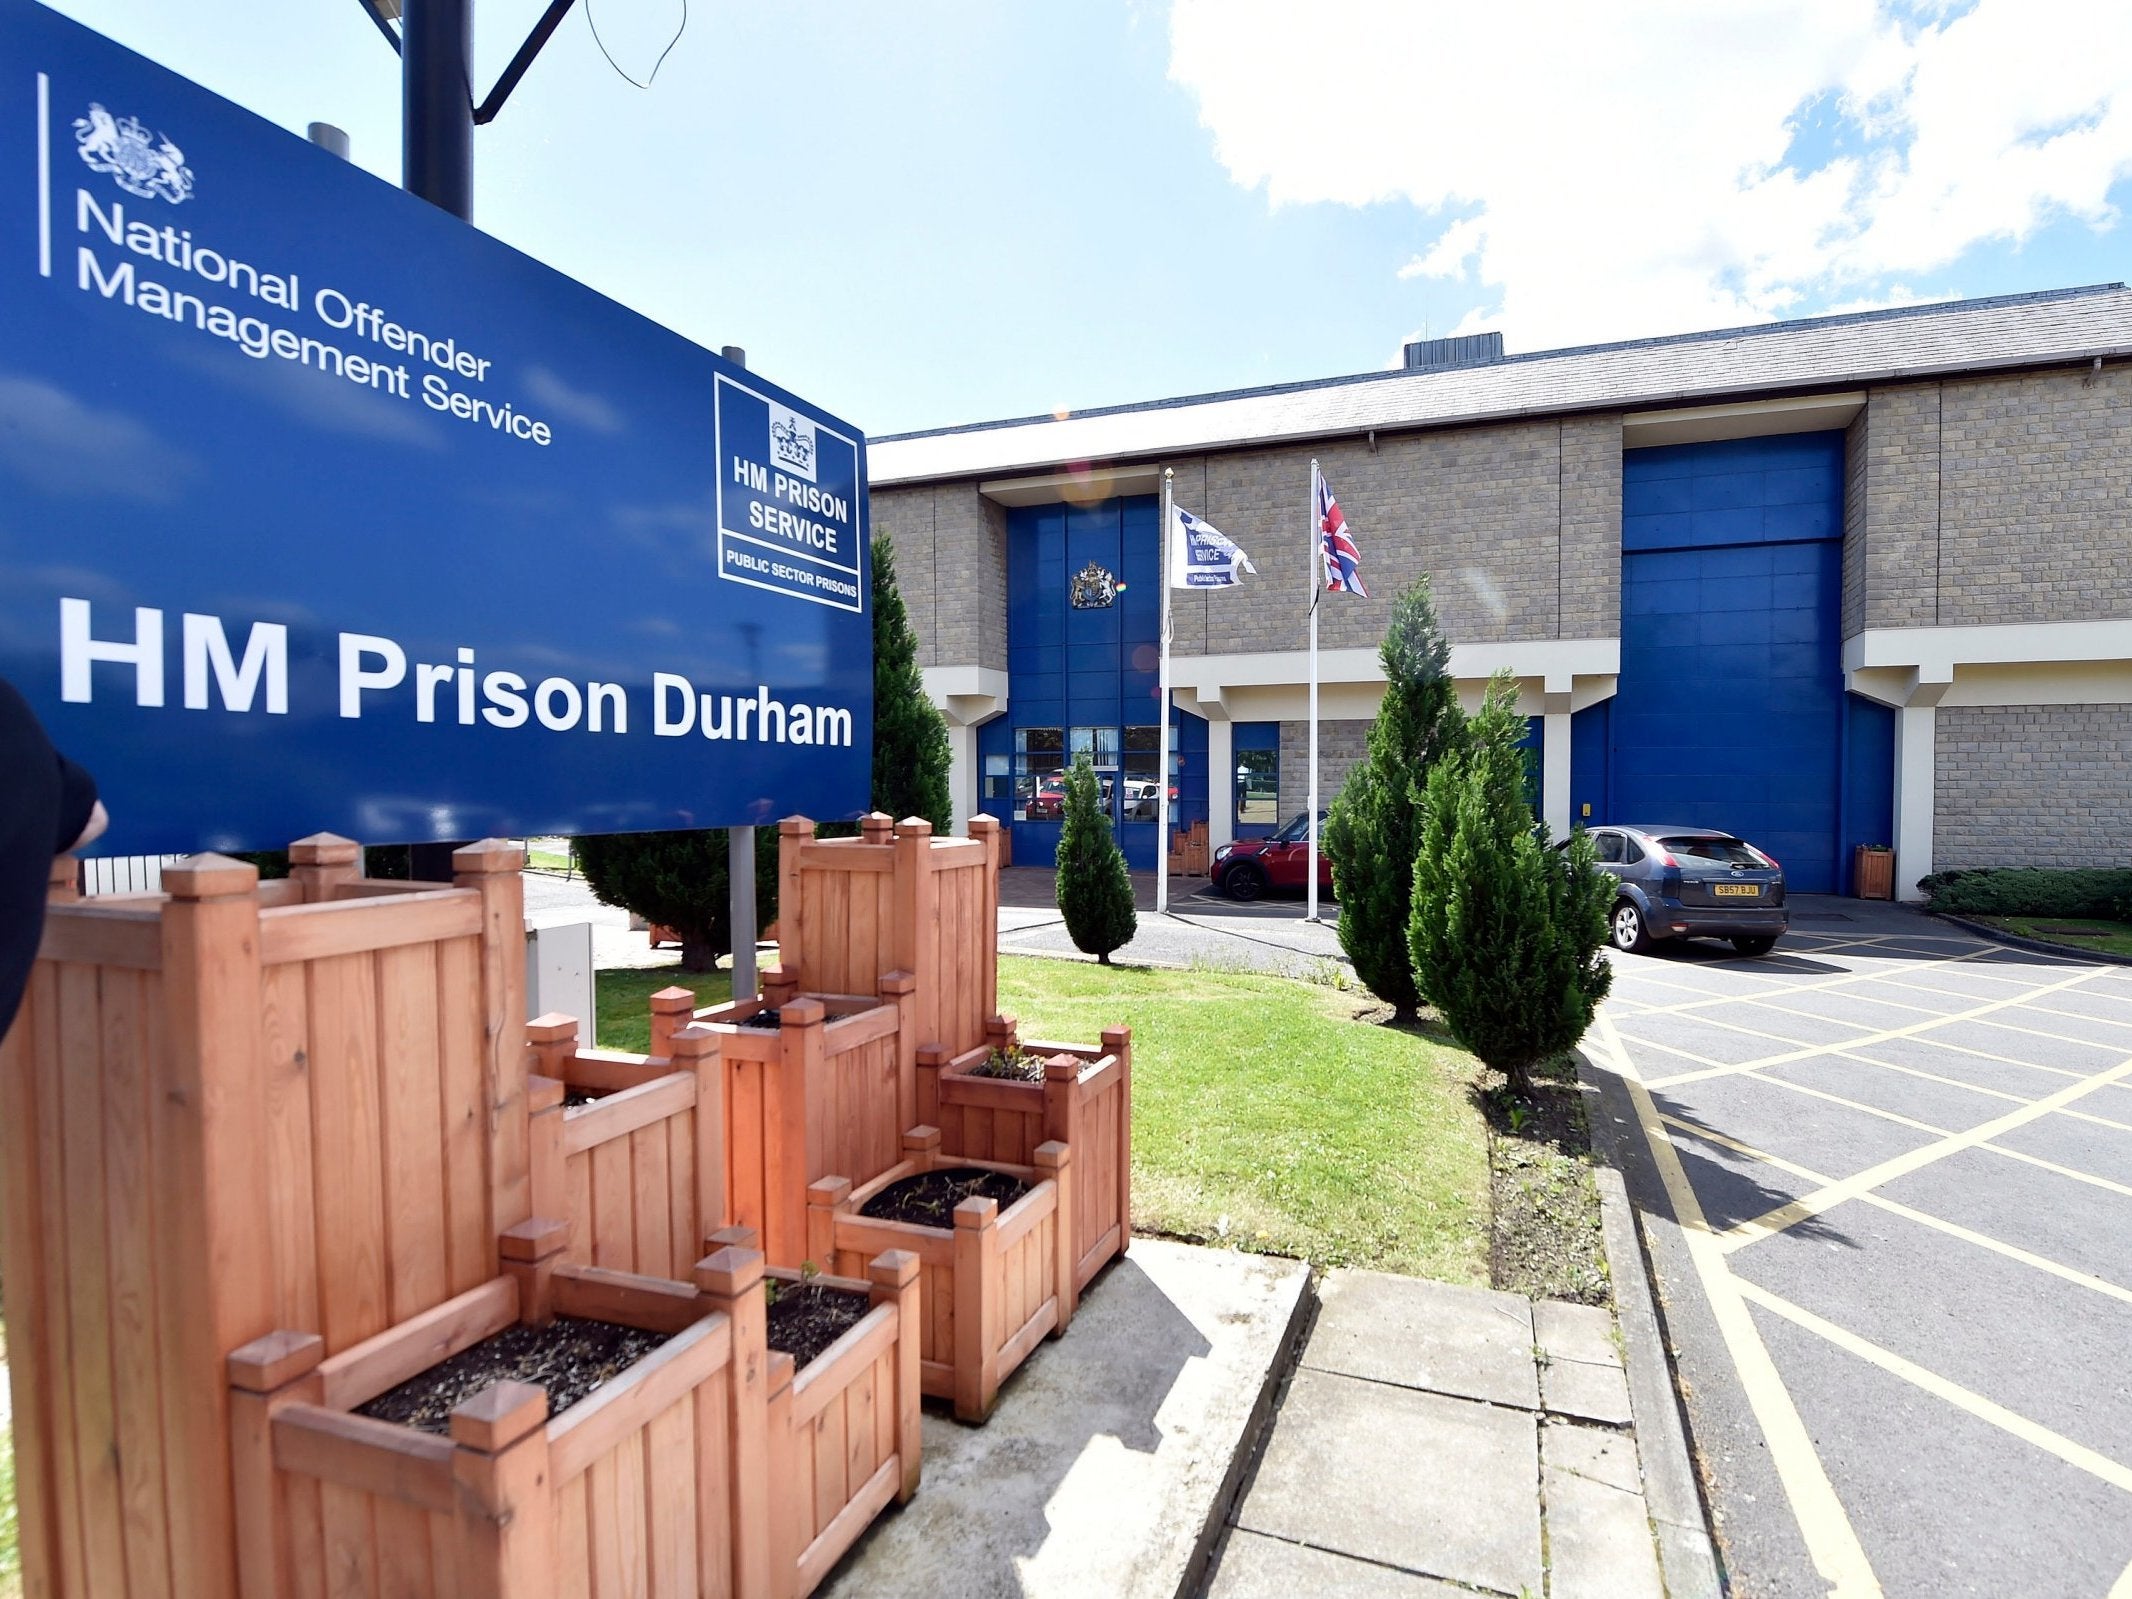 HMP Durham was promised scanning equipment, only for it to be diverted to another jail, according to a watchdog report